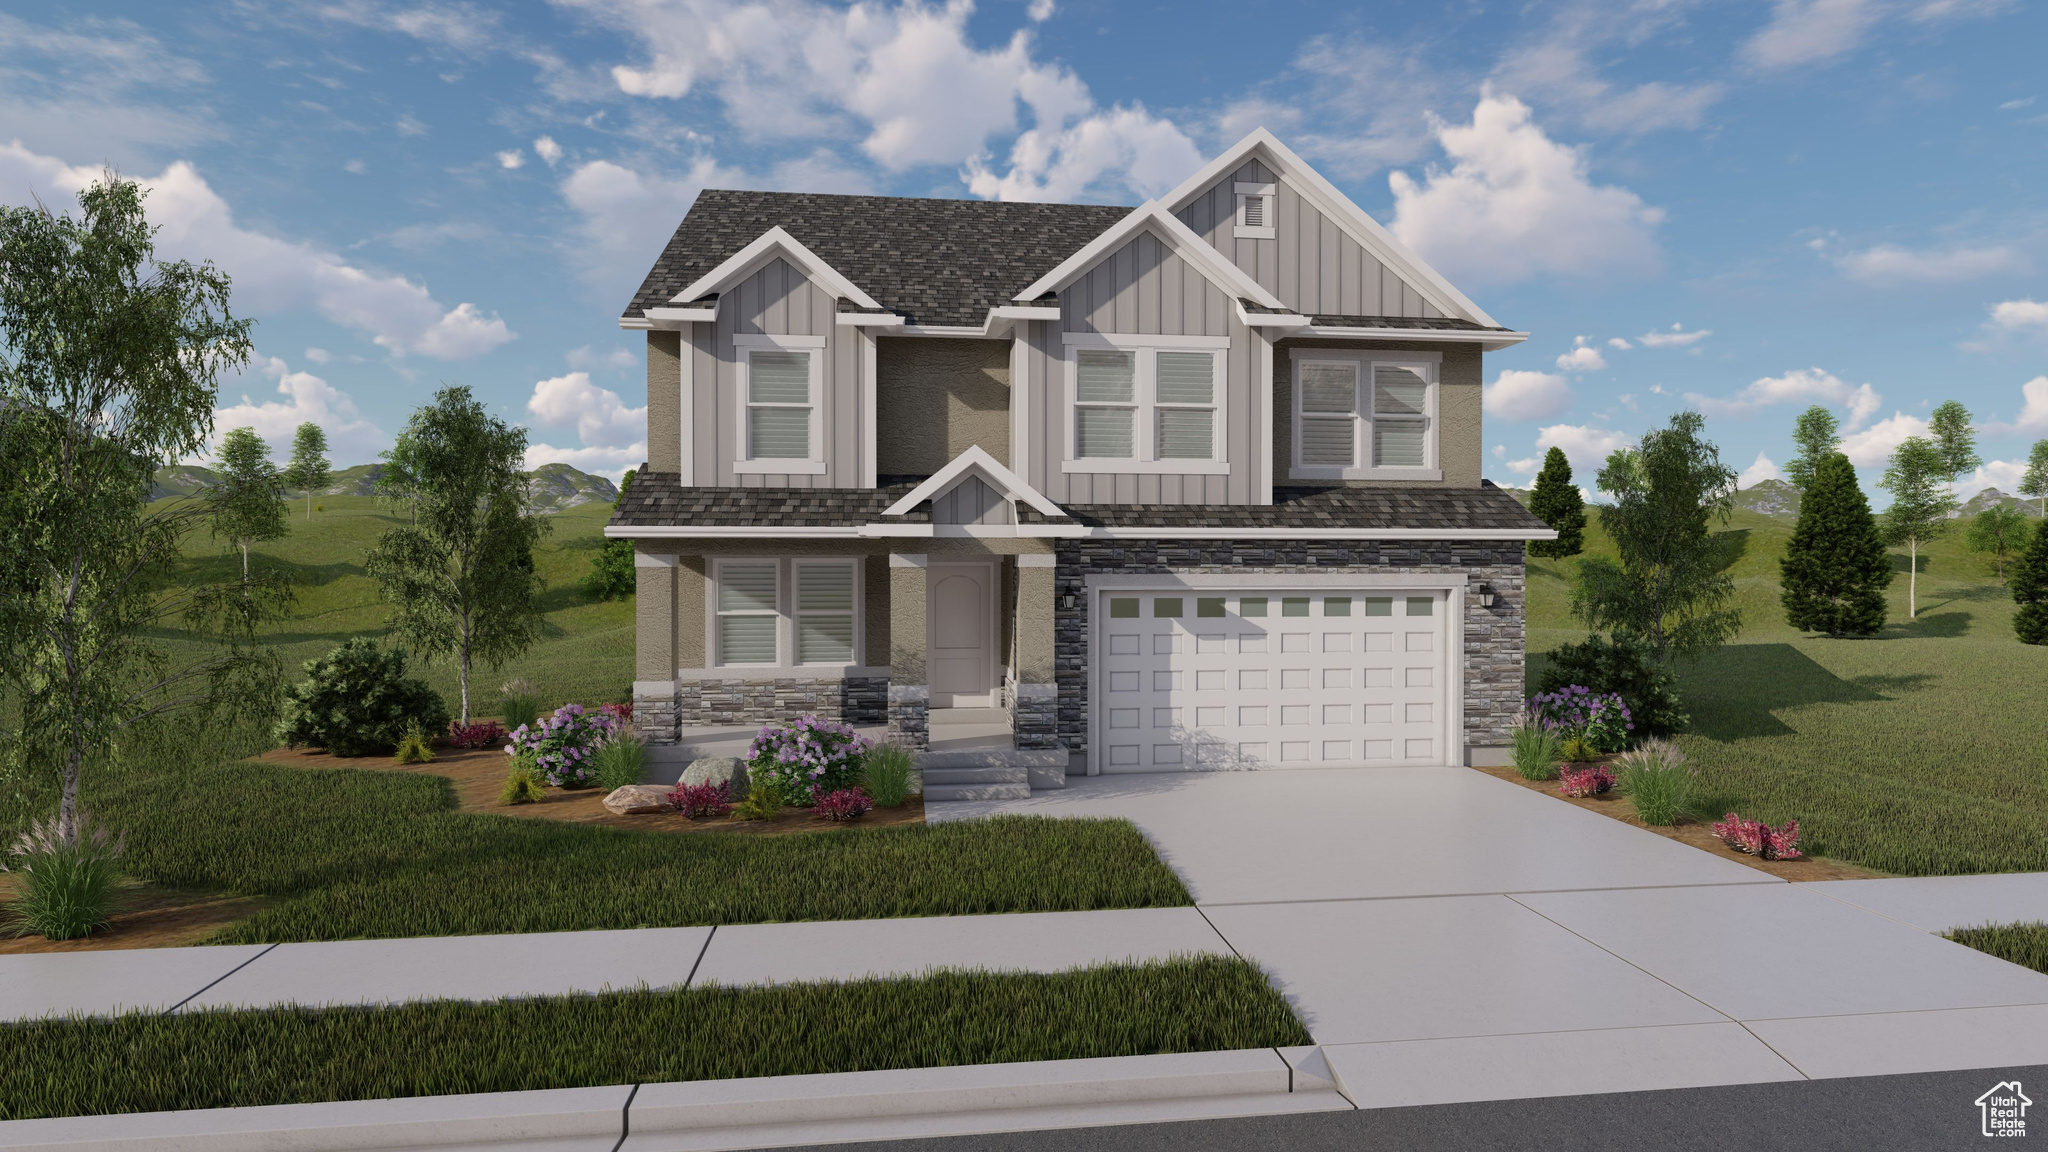 Craftsman-style home with a garage and a front yard